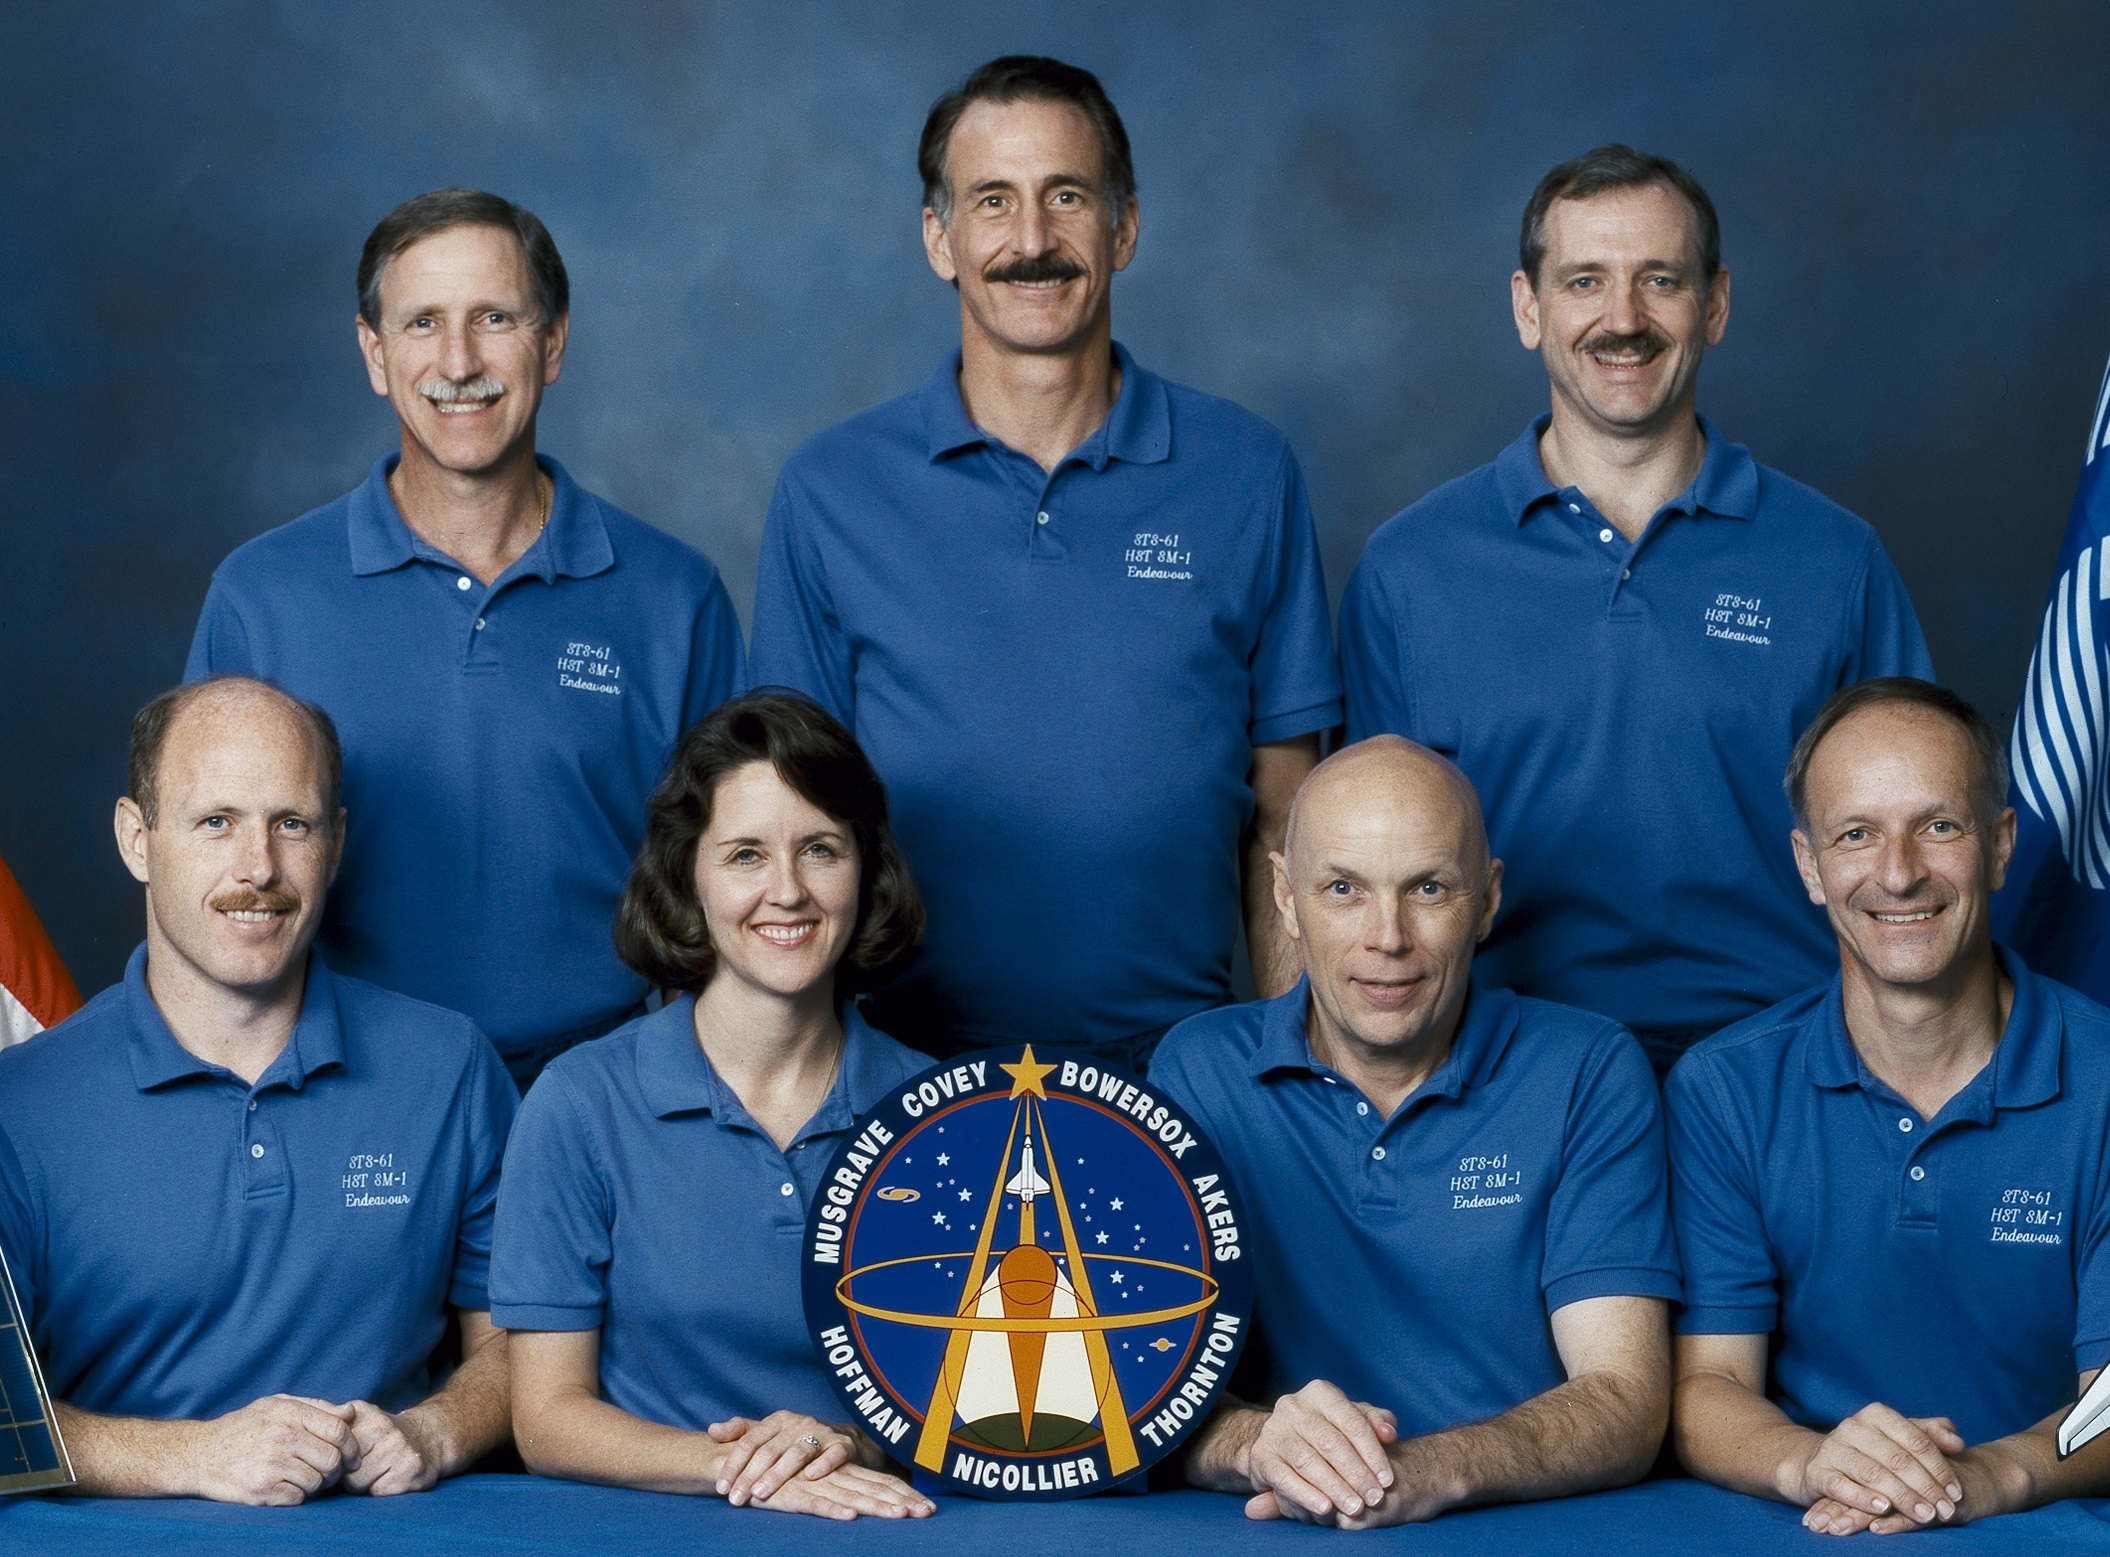 Flight crew of Space Shuttle Endeavour (STS-61). Seated, left to right: Kenneth D. Bowersox, Kathryn C. Thornton, F. Story Musgrave, and Claude Nicollier, ESA. Rear: Richard O. Covey, Jeffrey A. Hoffman, and Thomas D. Akers. (NASA)